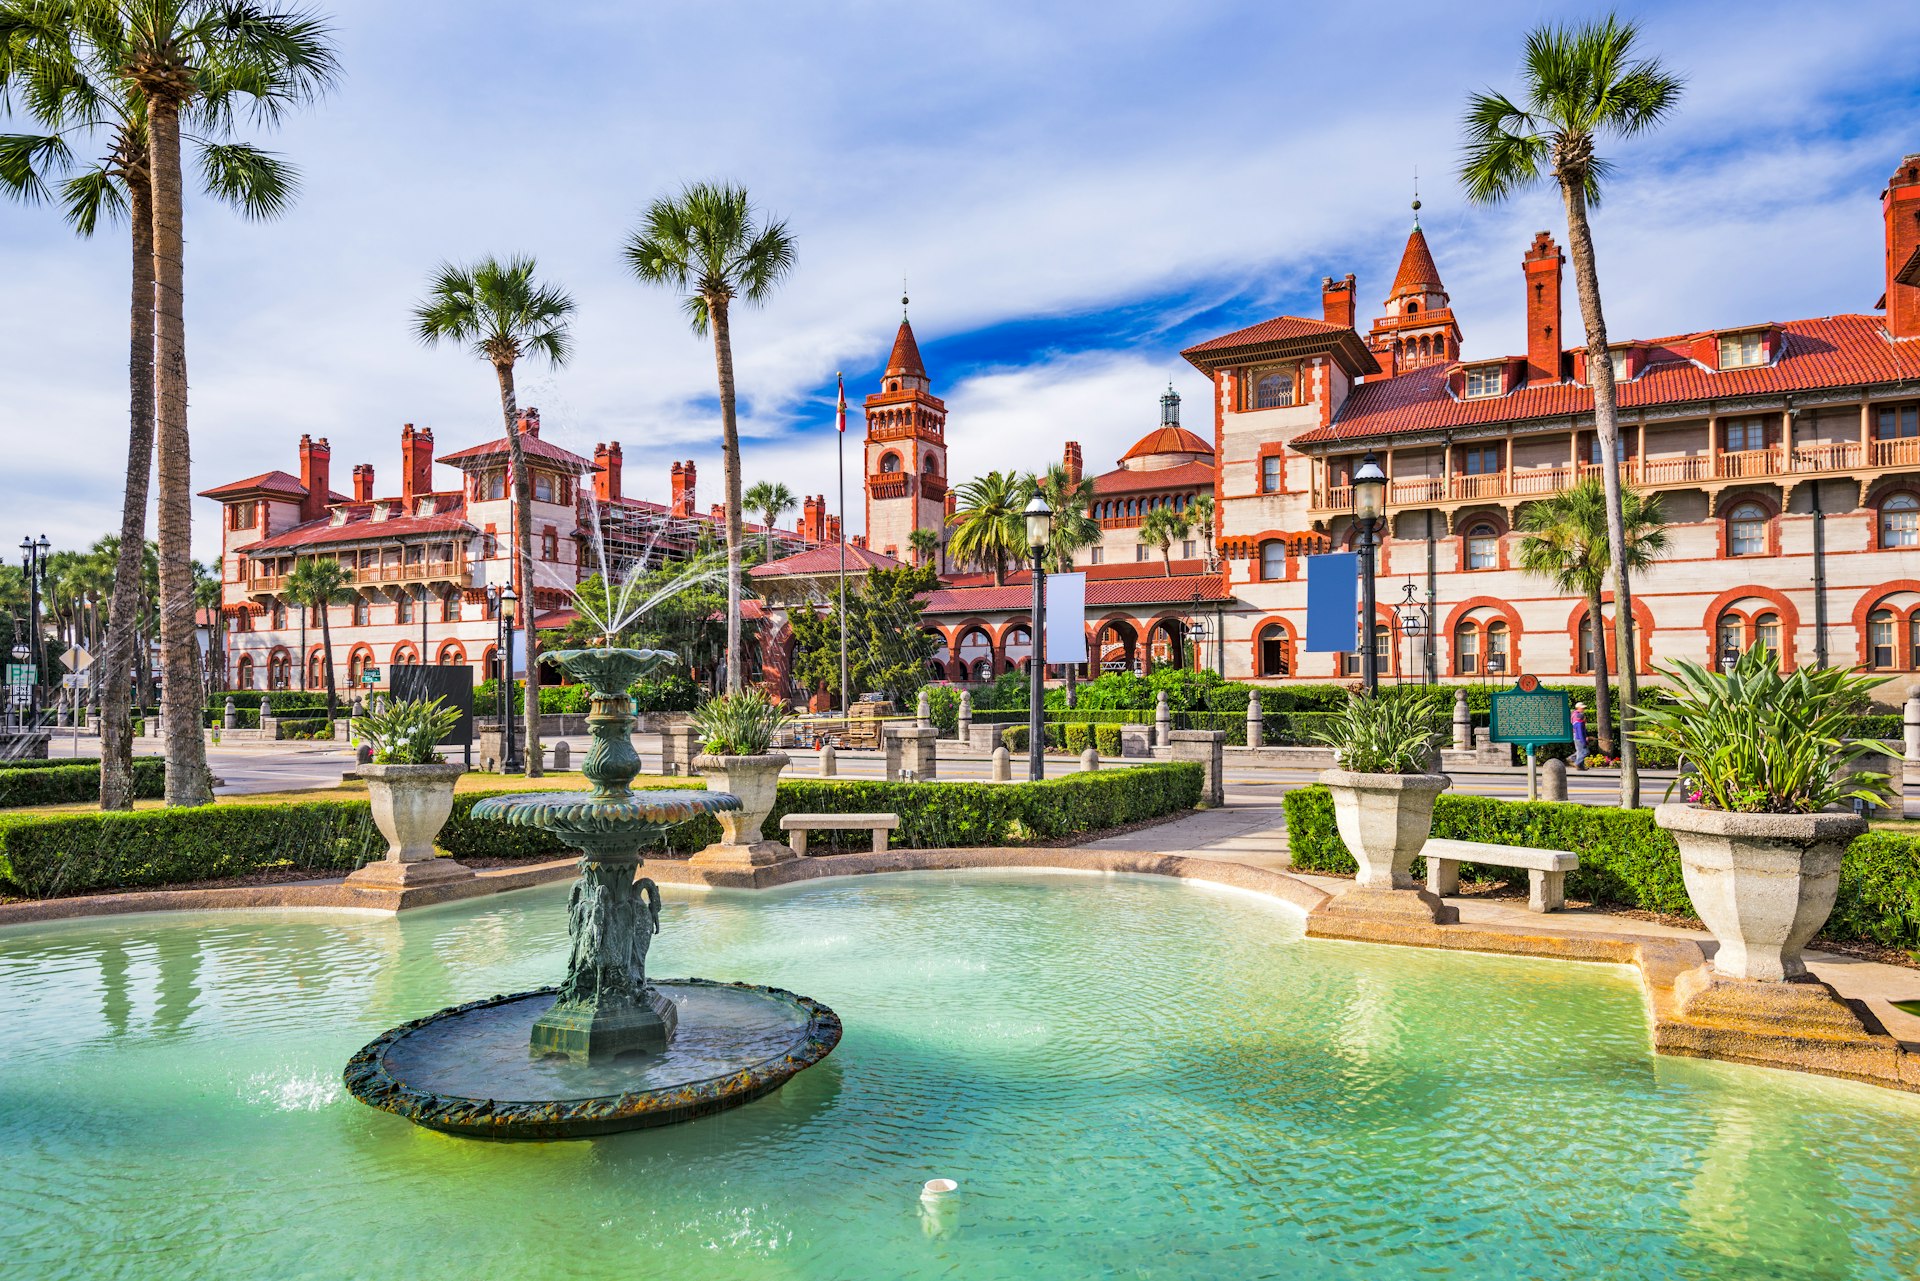 The courtyard of Flagler College designed in Spanish Renaissance style in St. Augustine, Florida